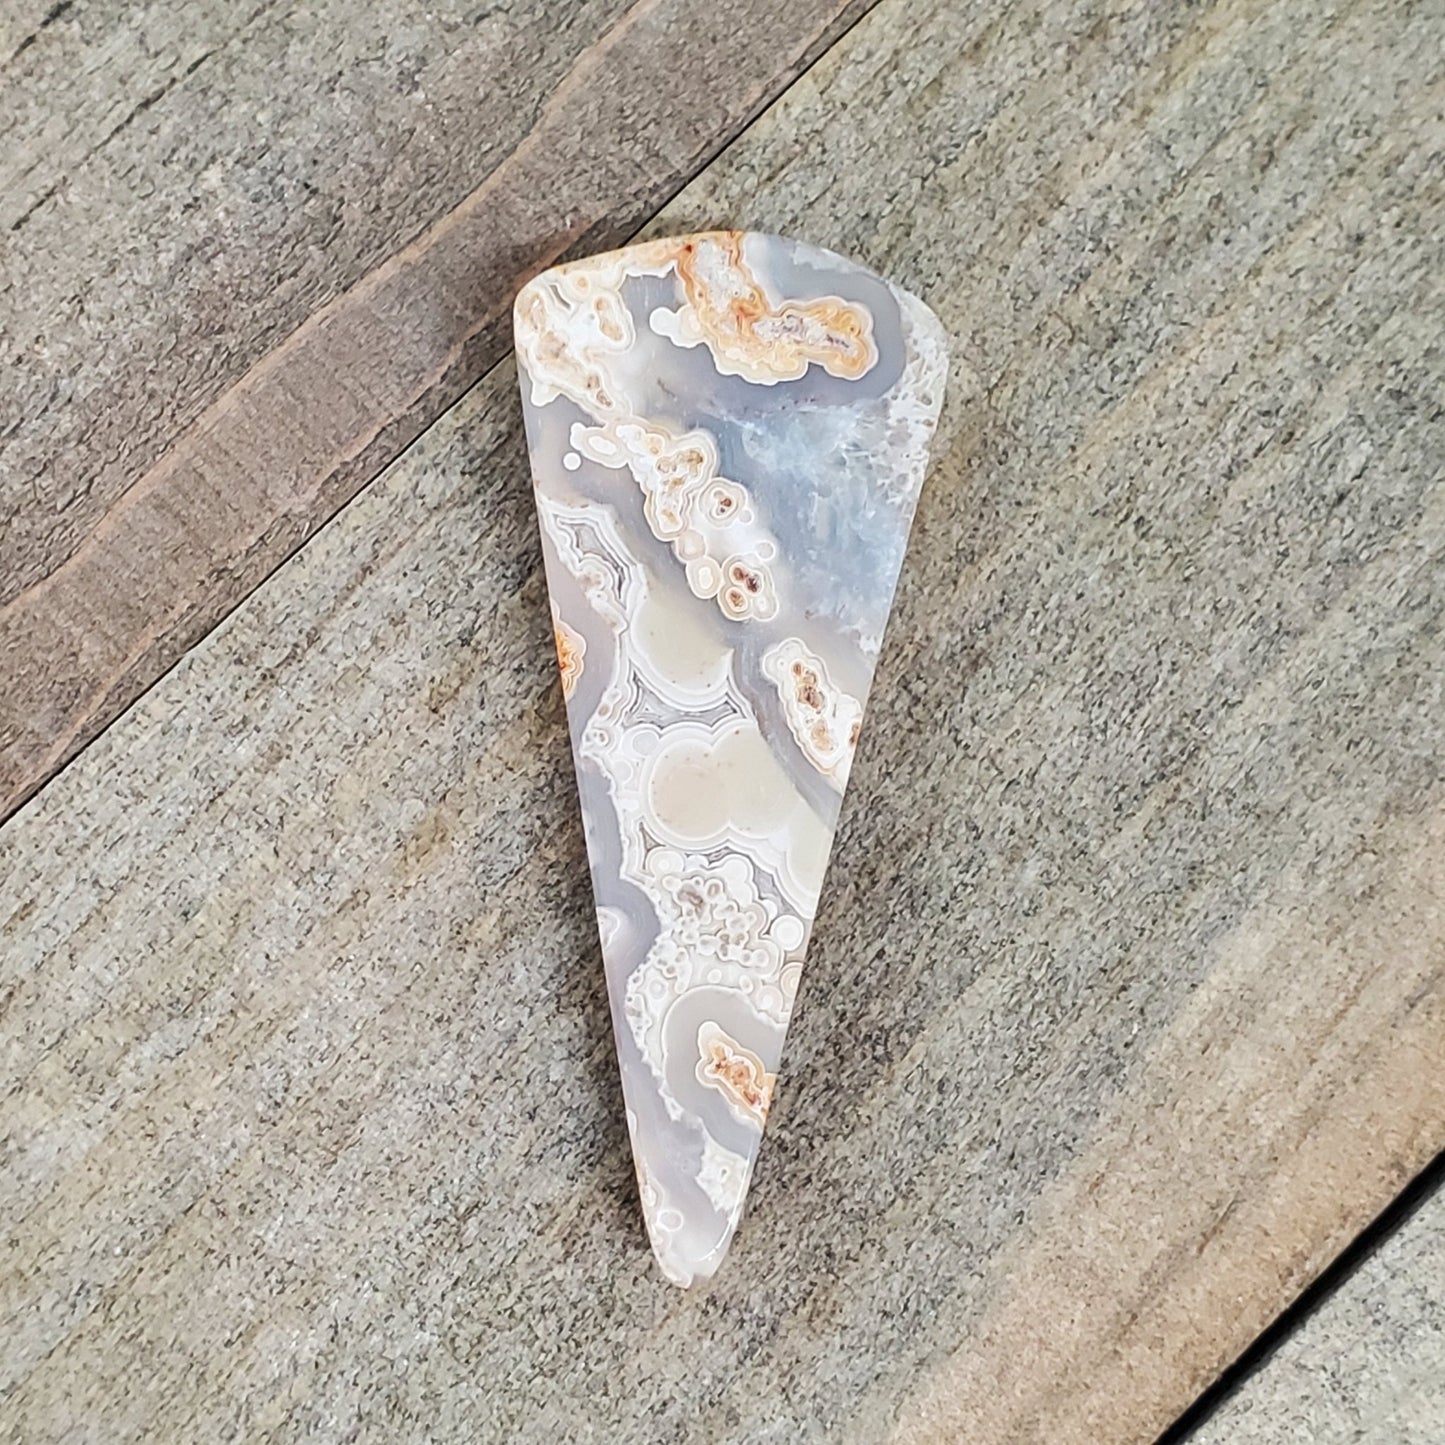 Crazy Lace Agate Cabochon - 43.25 Carats - Earth & Hammer